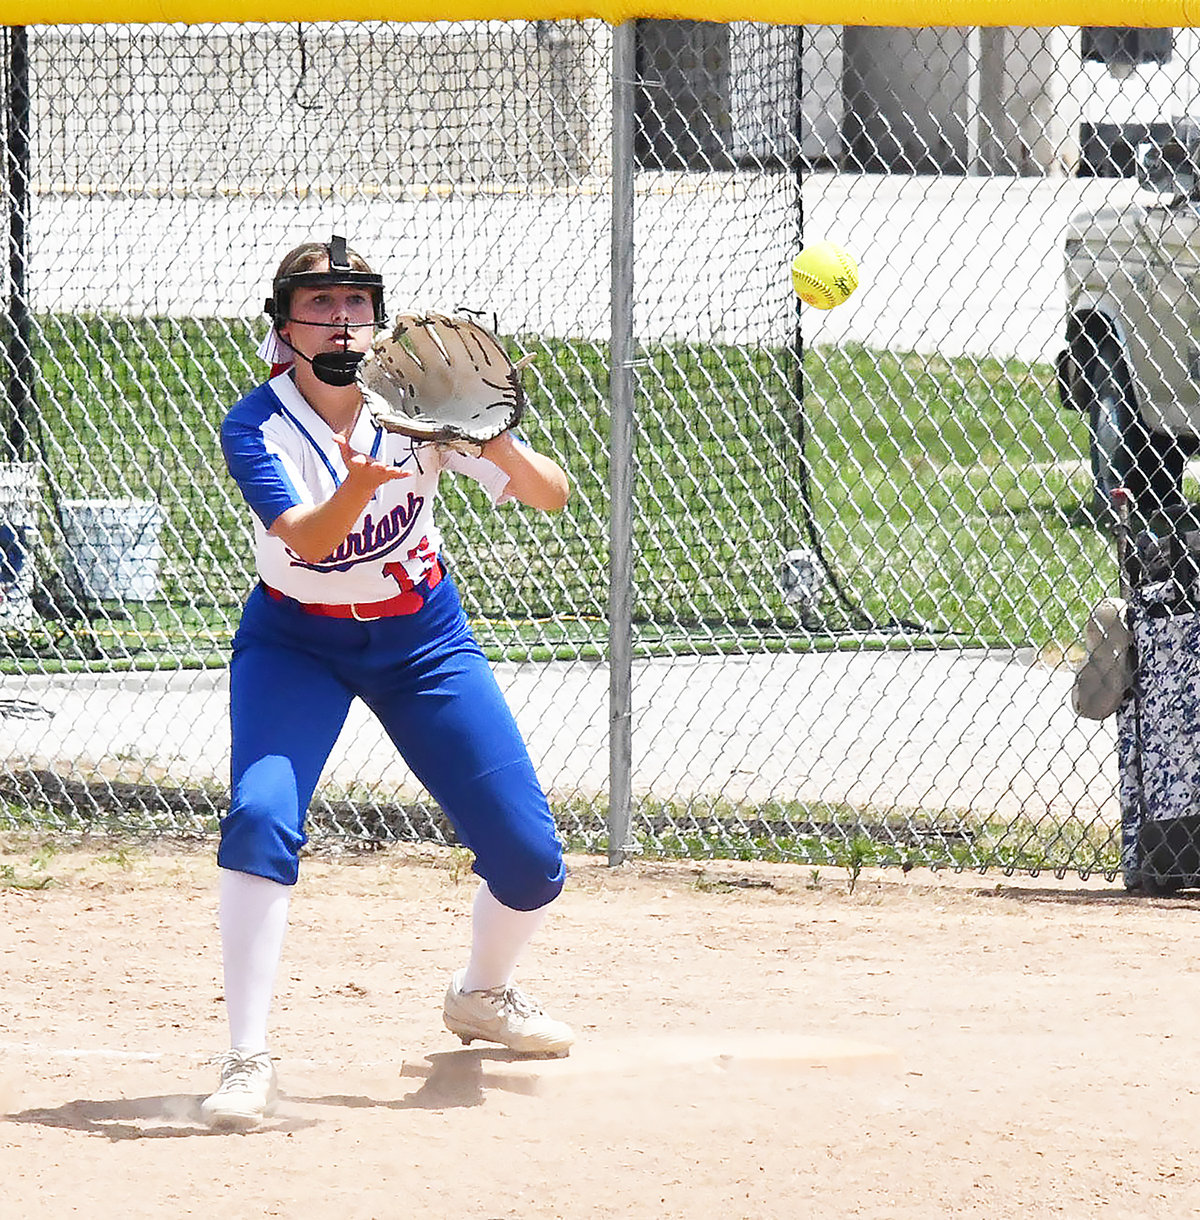 Elizabeth Reisenauer covers first base on a nub hit from Cairo during a scrimmage on Monday, June 27.